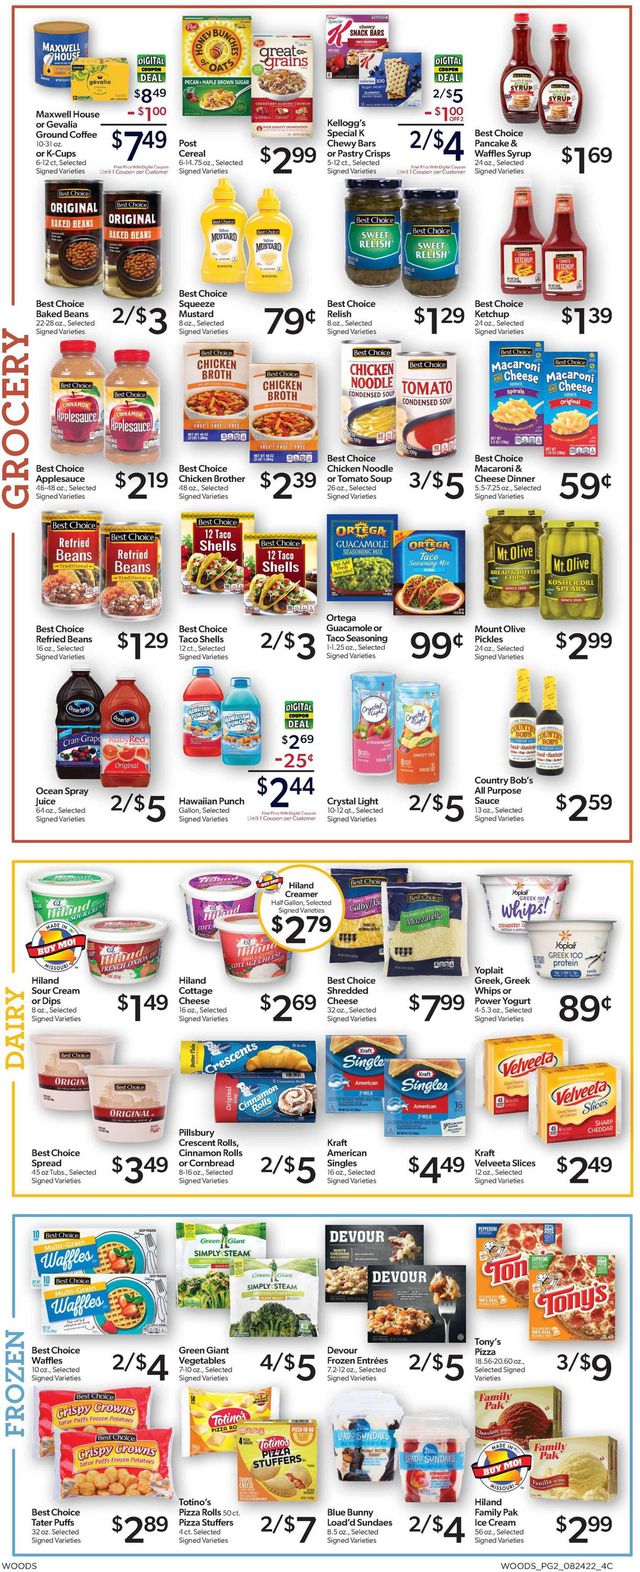 Woods Supermarket Ad from 08/24/2022